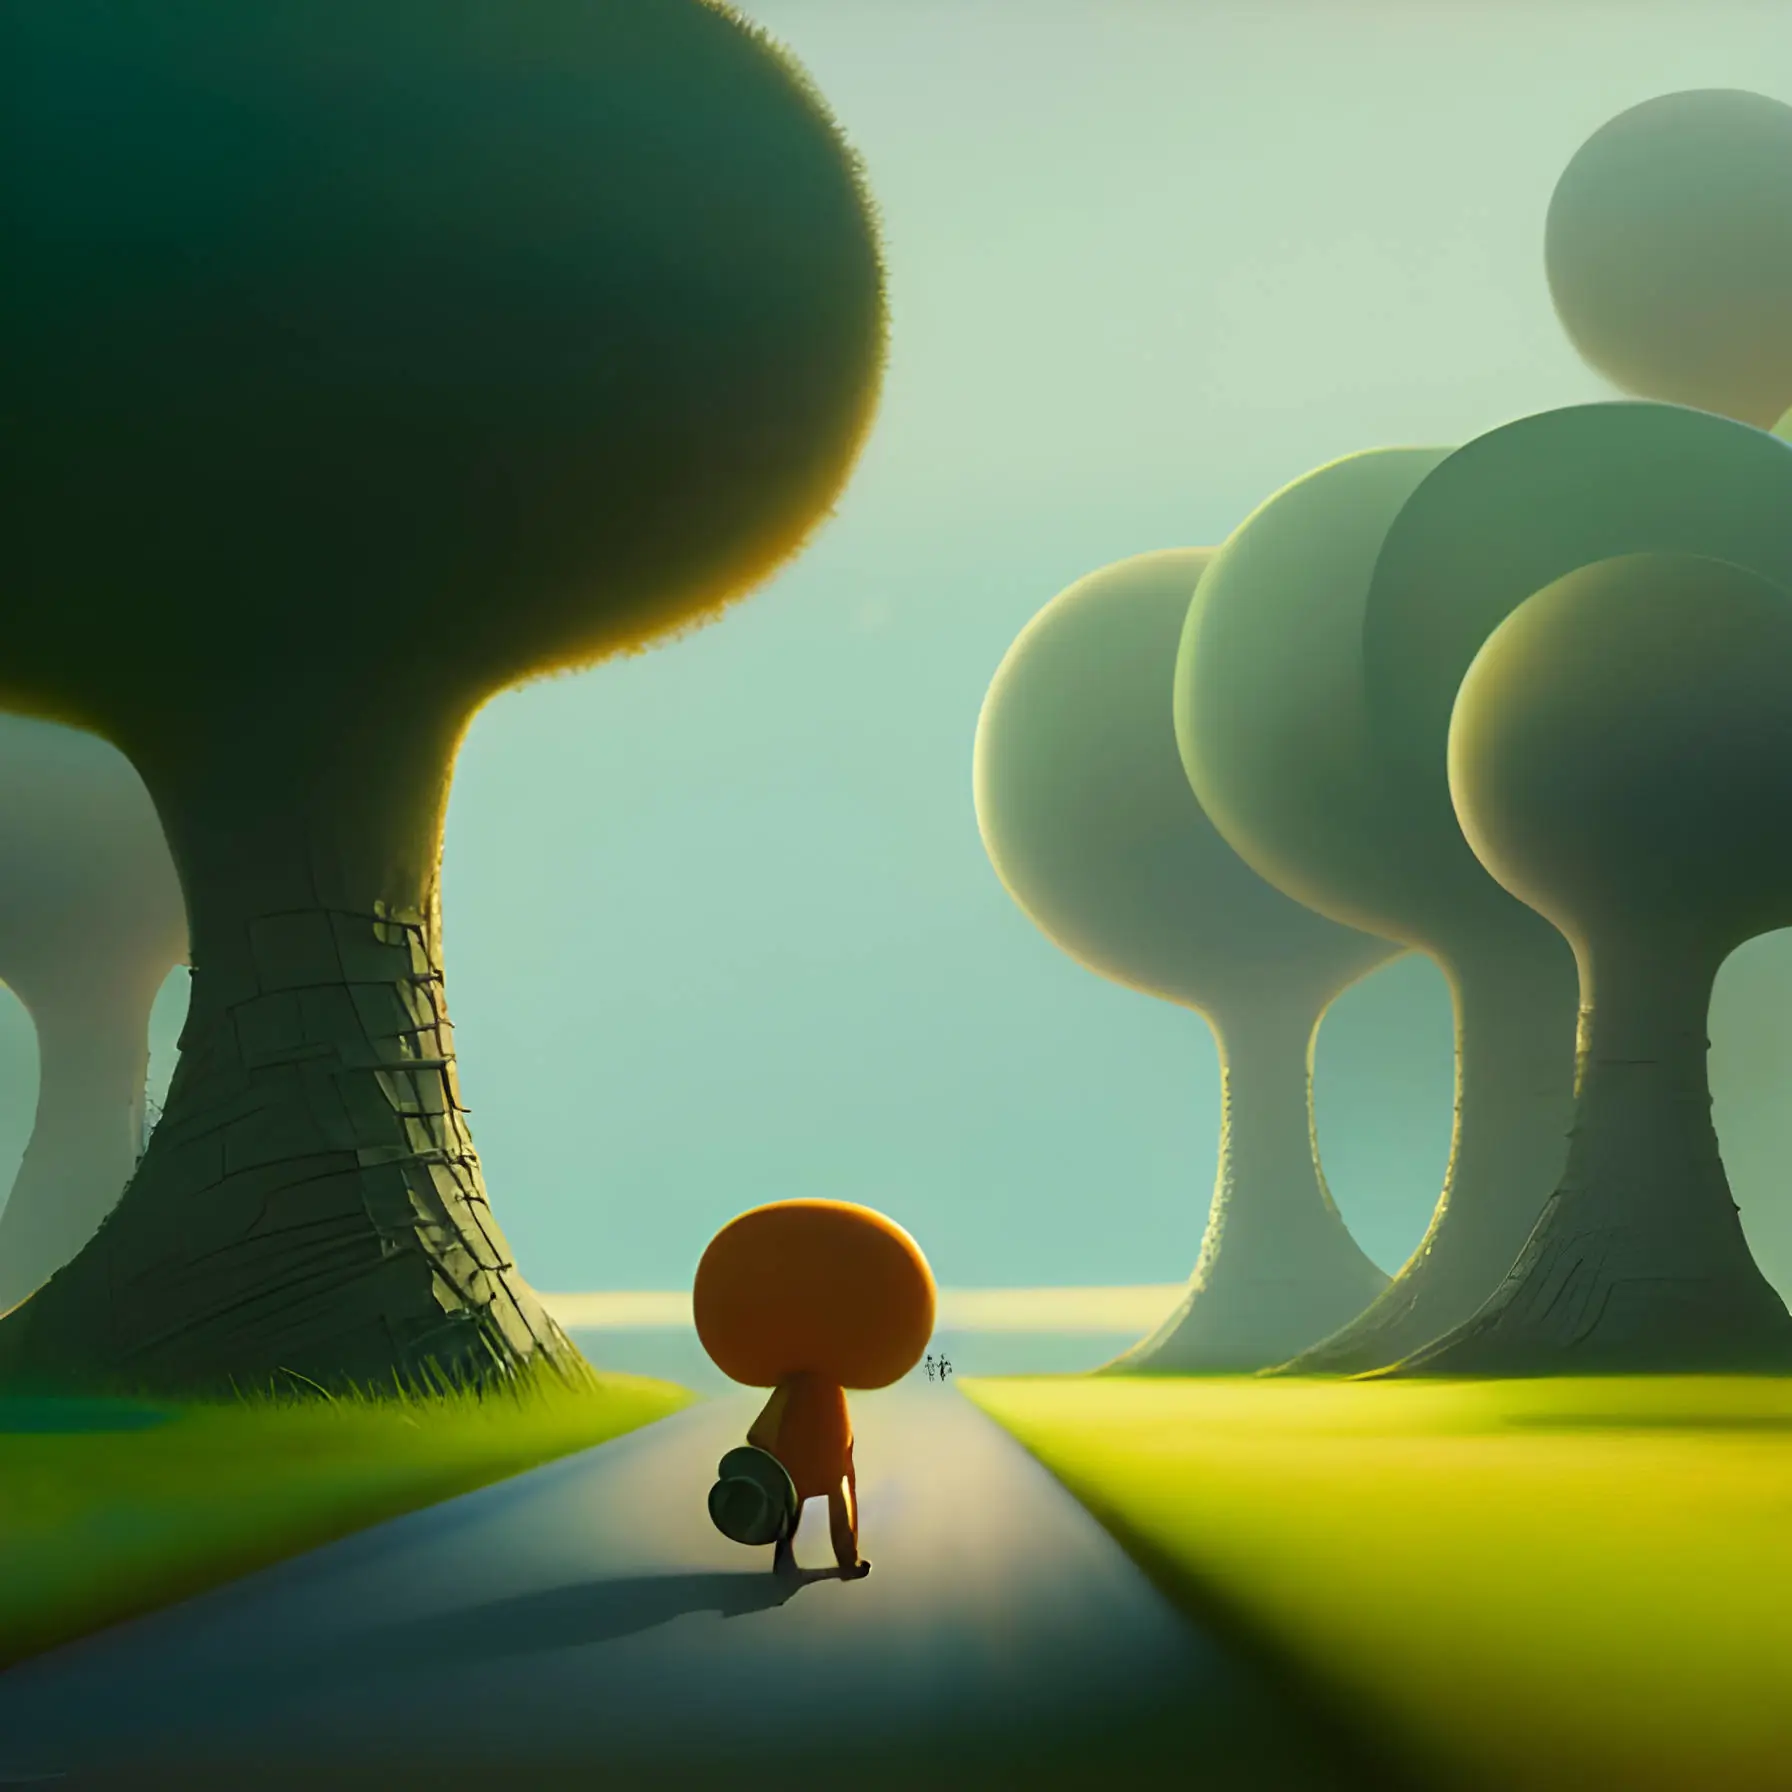 A solitary figure walks down a path in a fantastical, and colourful, forest.